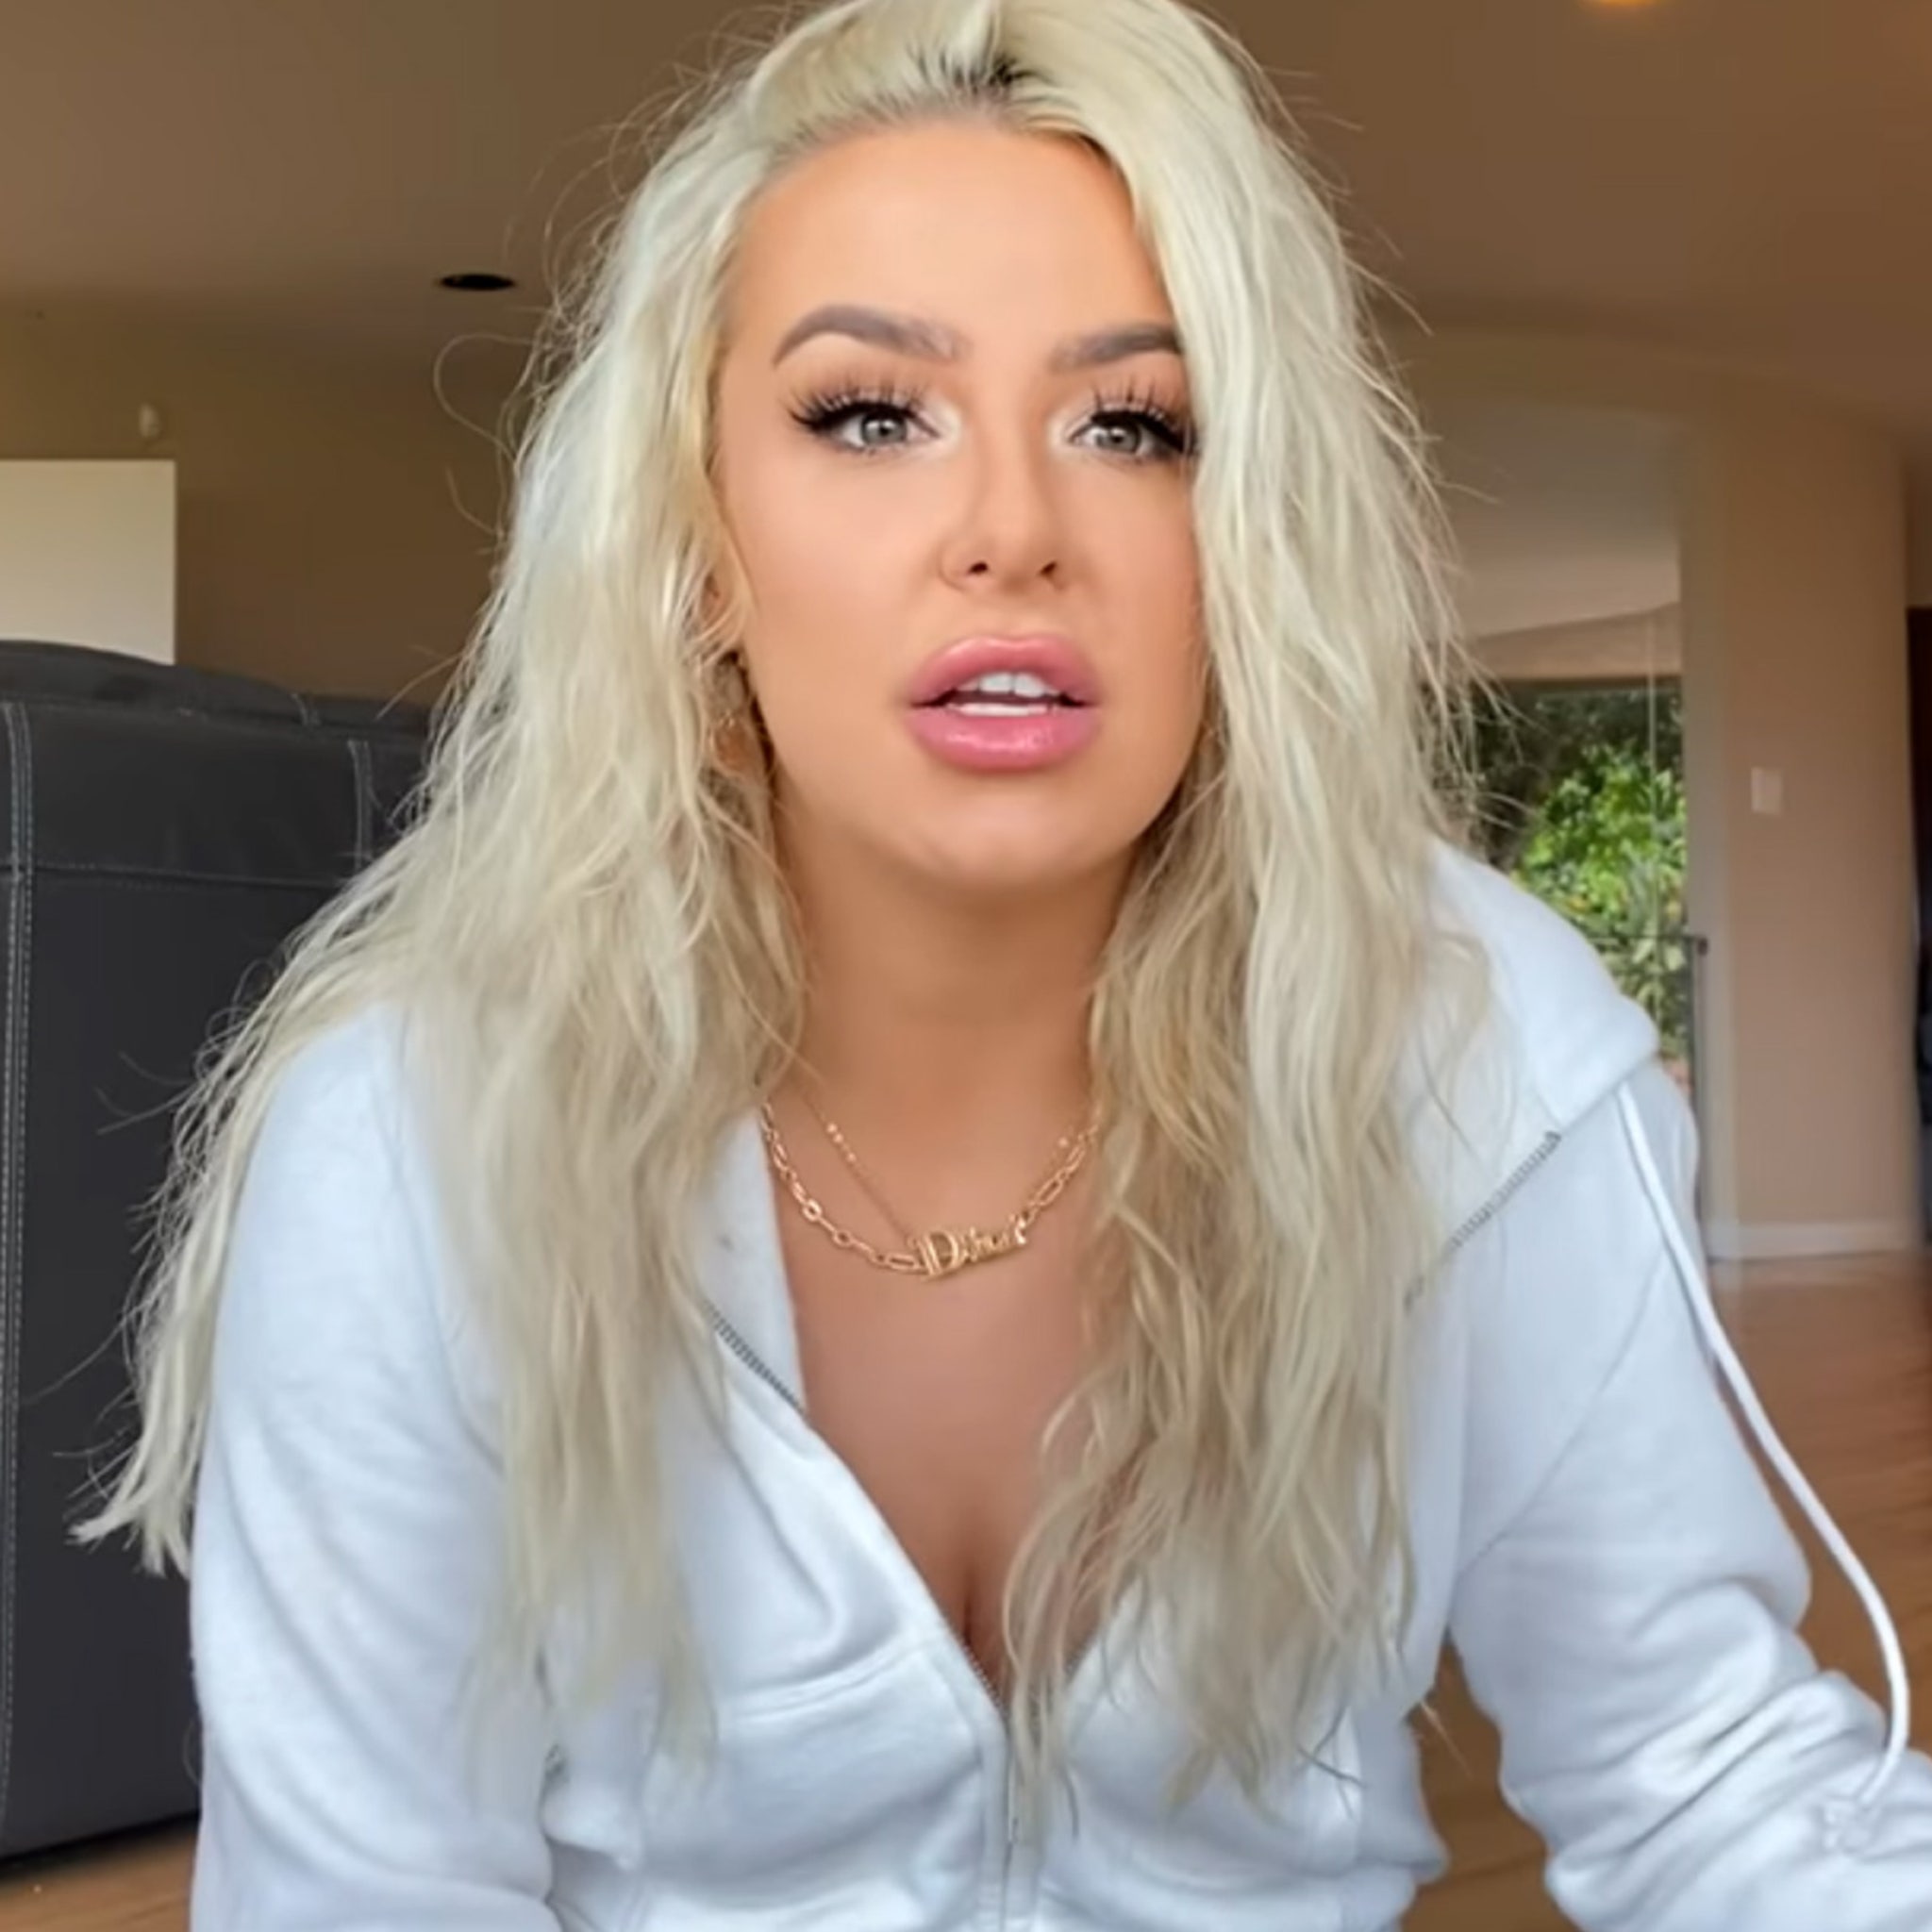 Tana Mongeau Says She Suffered Childhood Physical and Mental Abuse